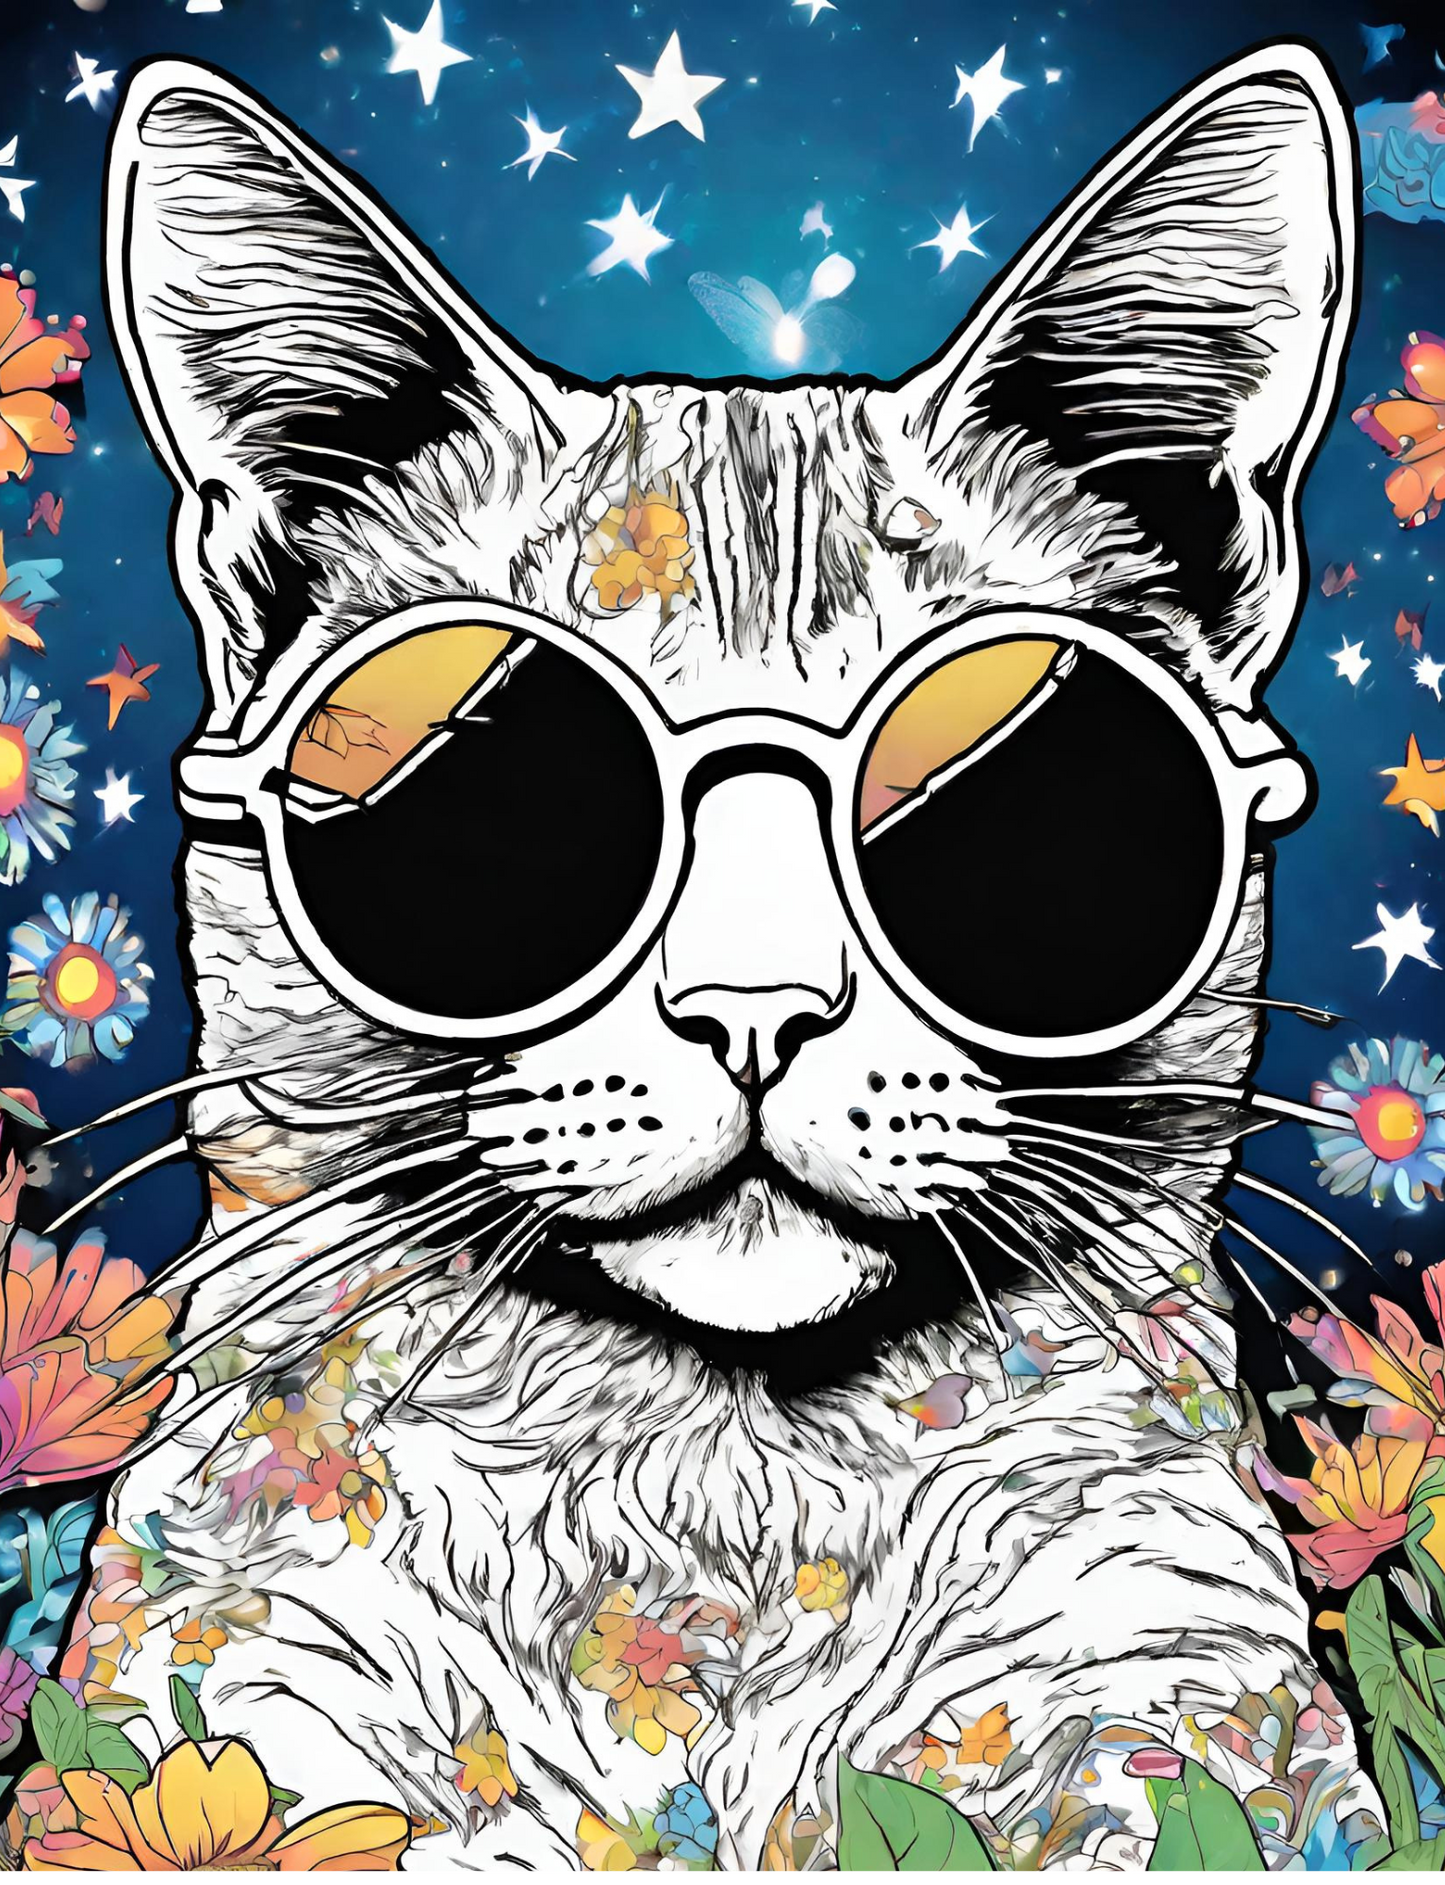 Sticky the Kitty - Psychedelic Coloring Book!